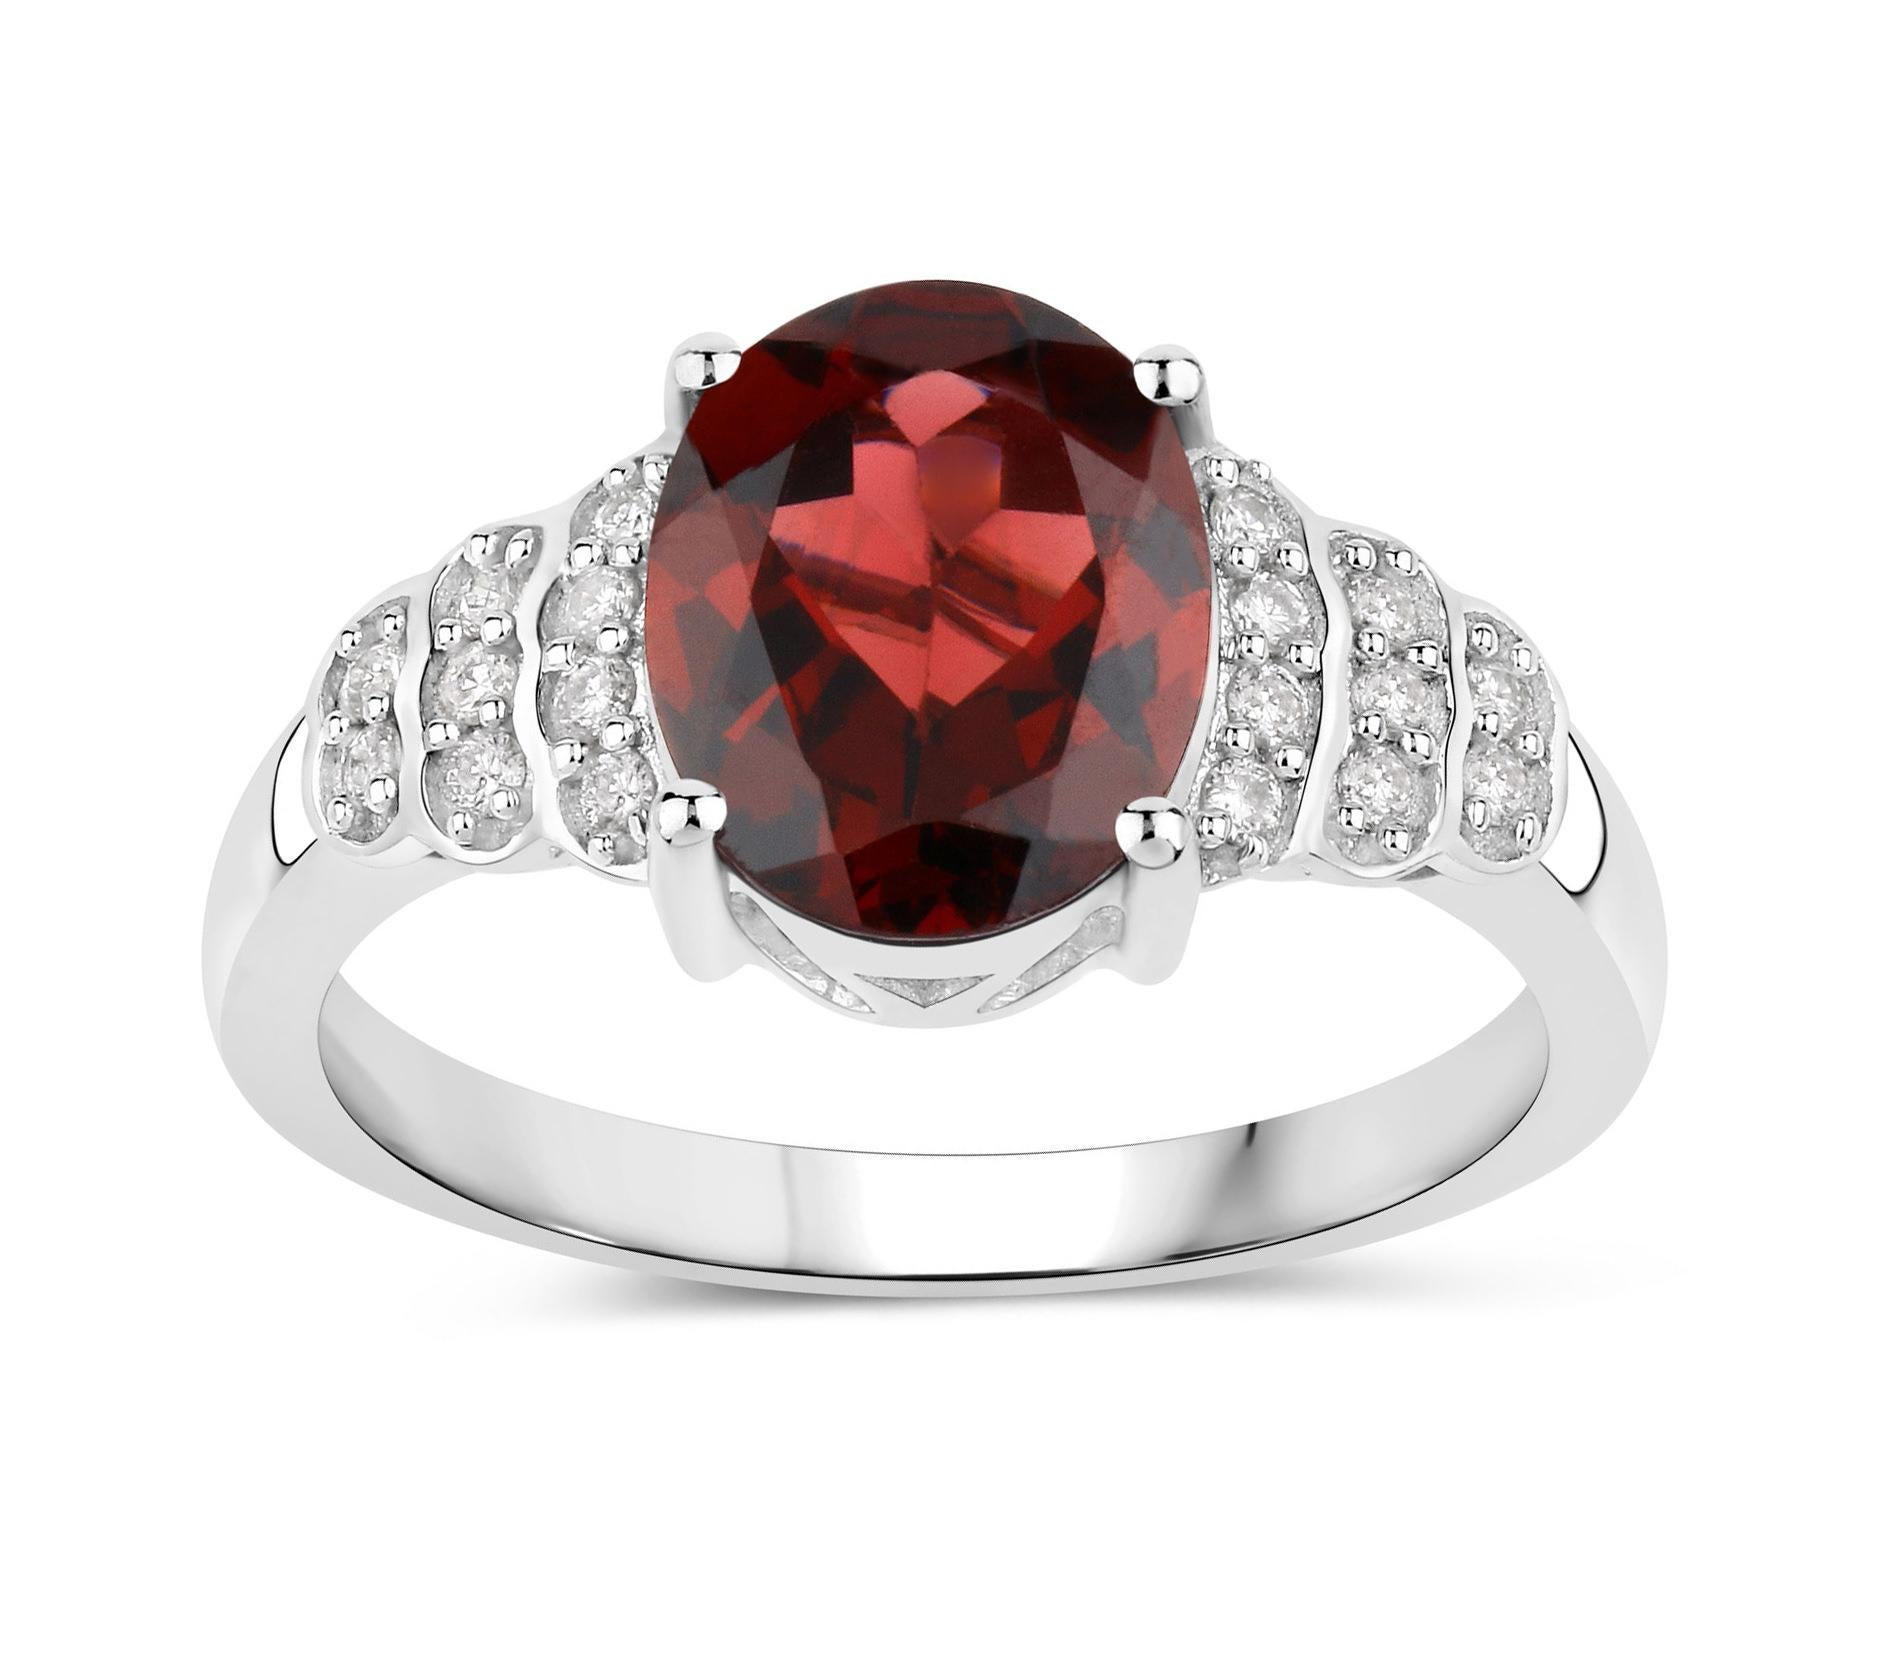 Natural Rhodolite Garnet and Diamond Bridge Ring 2.90 Carats 14k White Gold In Excellent Condition For Sale In Laguna Niguel, CA